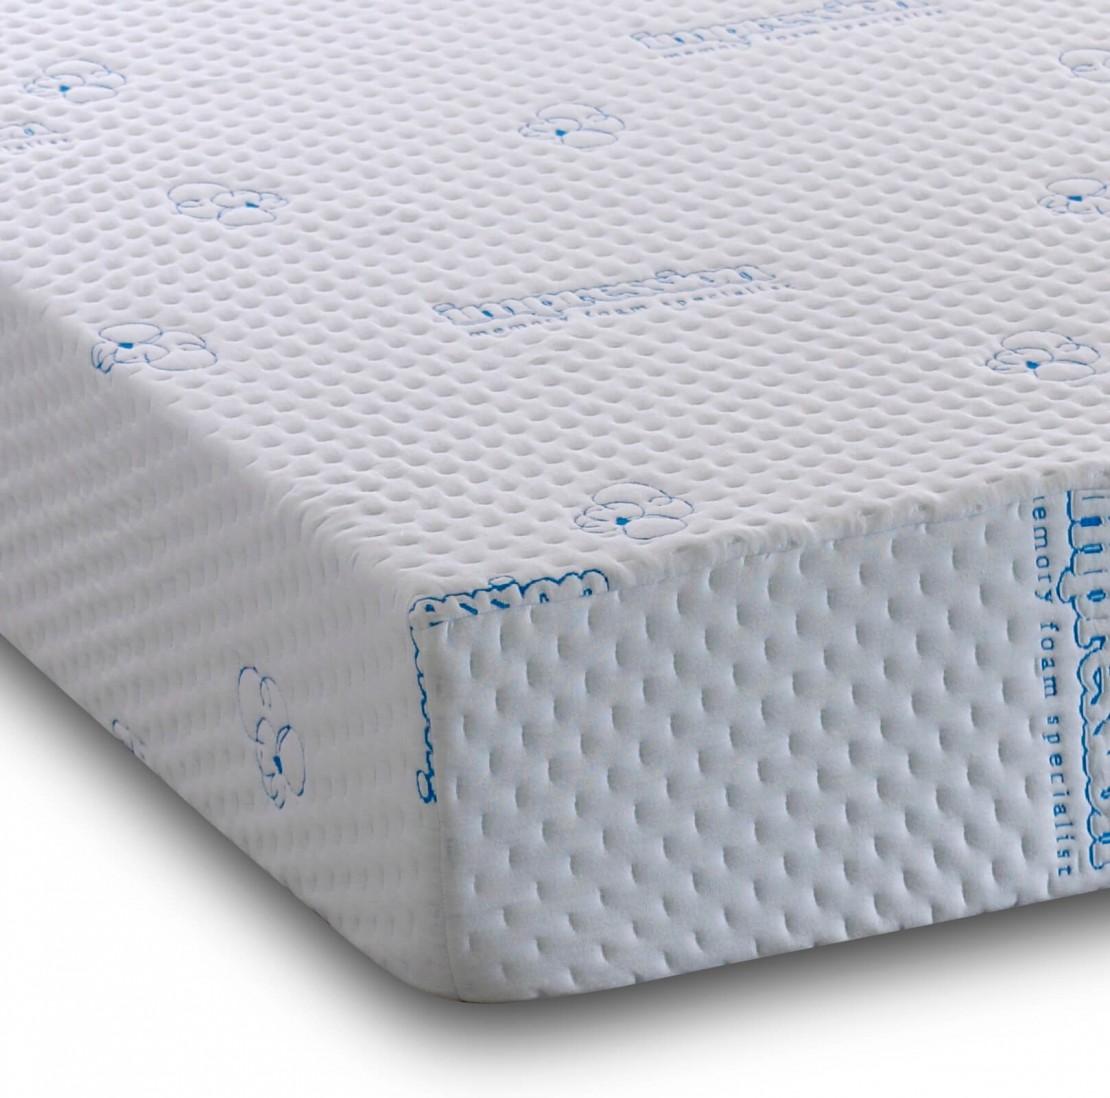 /_images/product-photos/visco-therapy-visco-4000-hd-memory-foam-firm-mattress-a.jpg